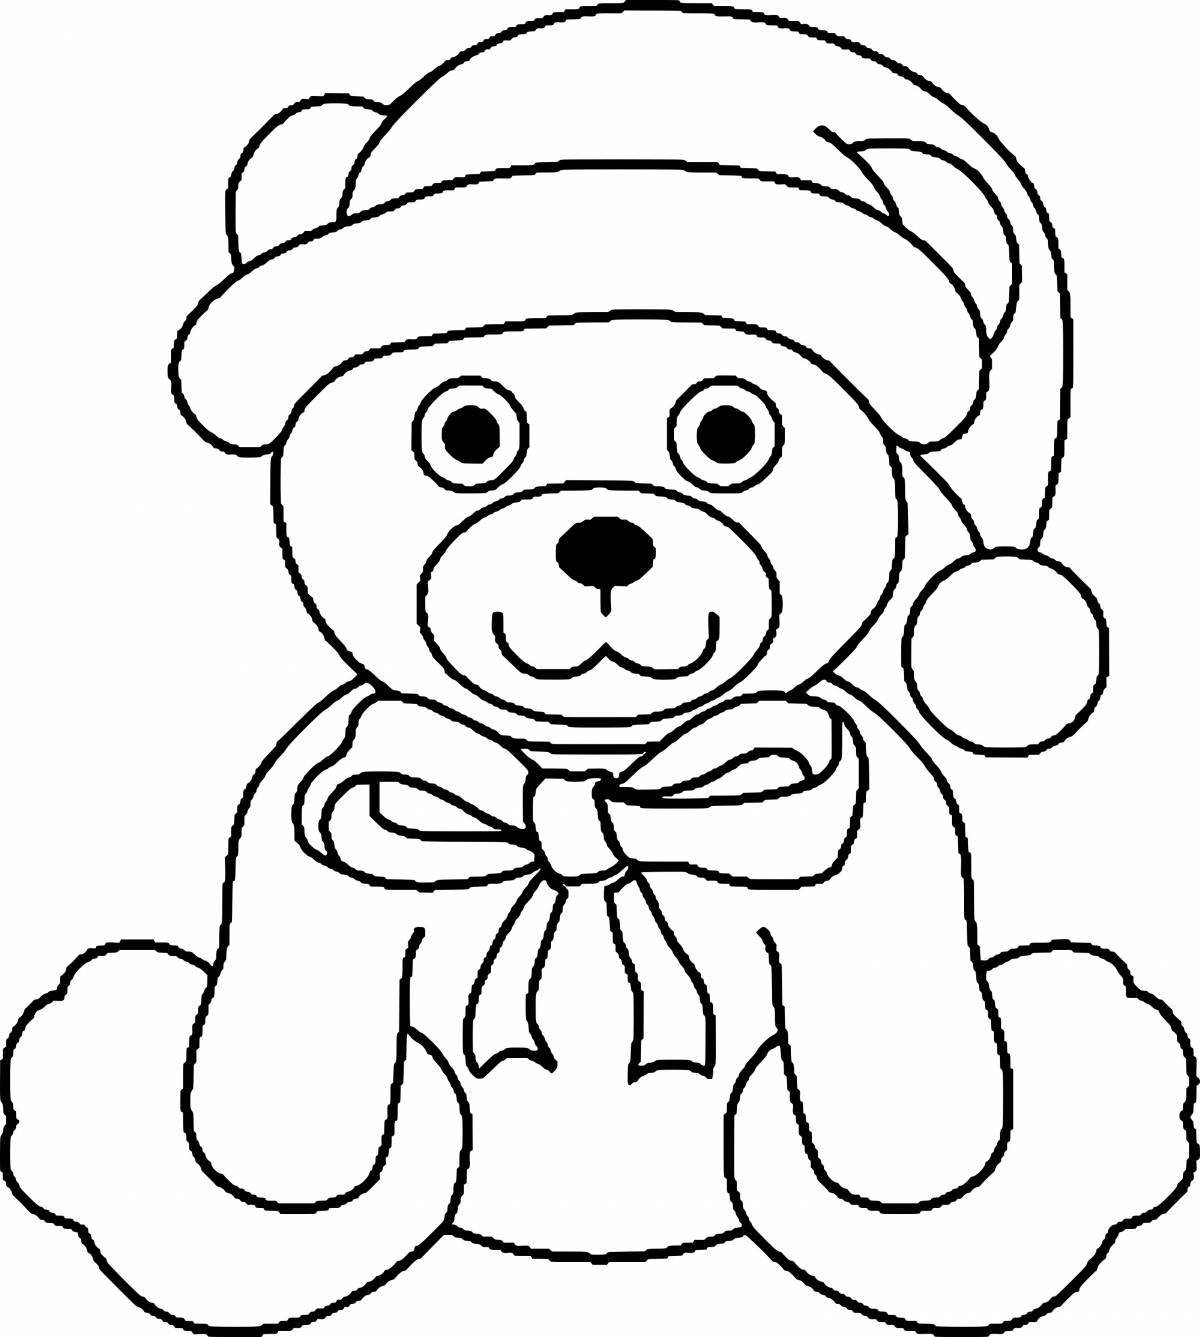 Sweet Christmas bear coloring page